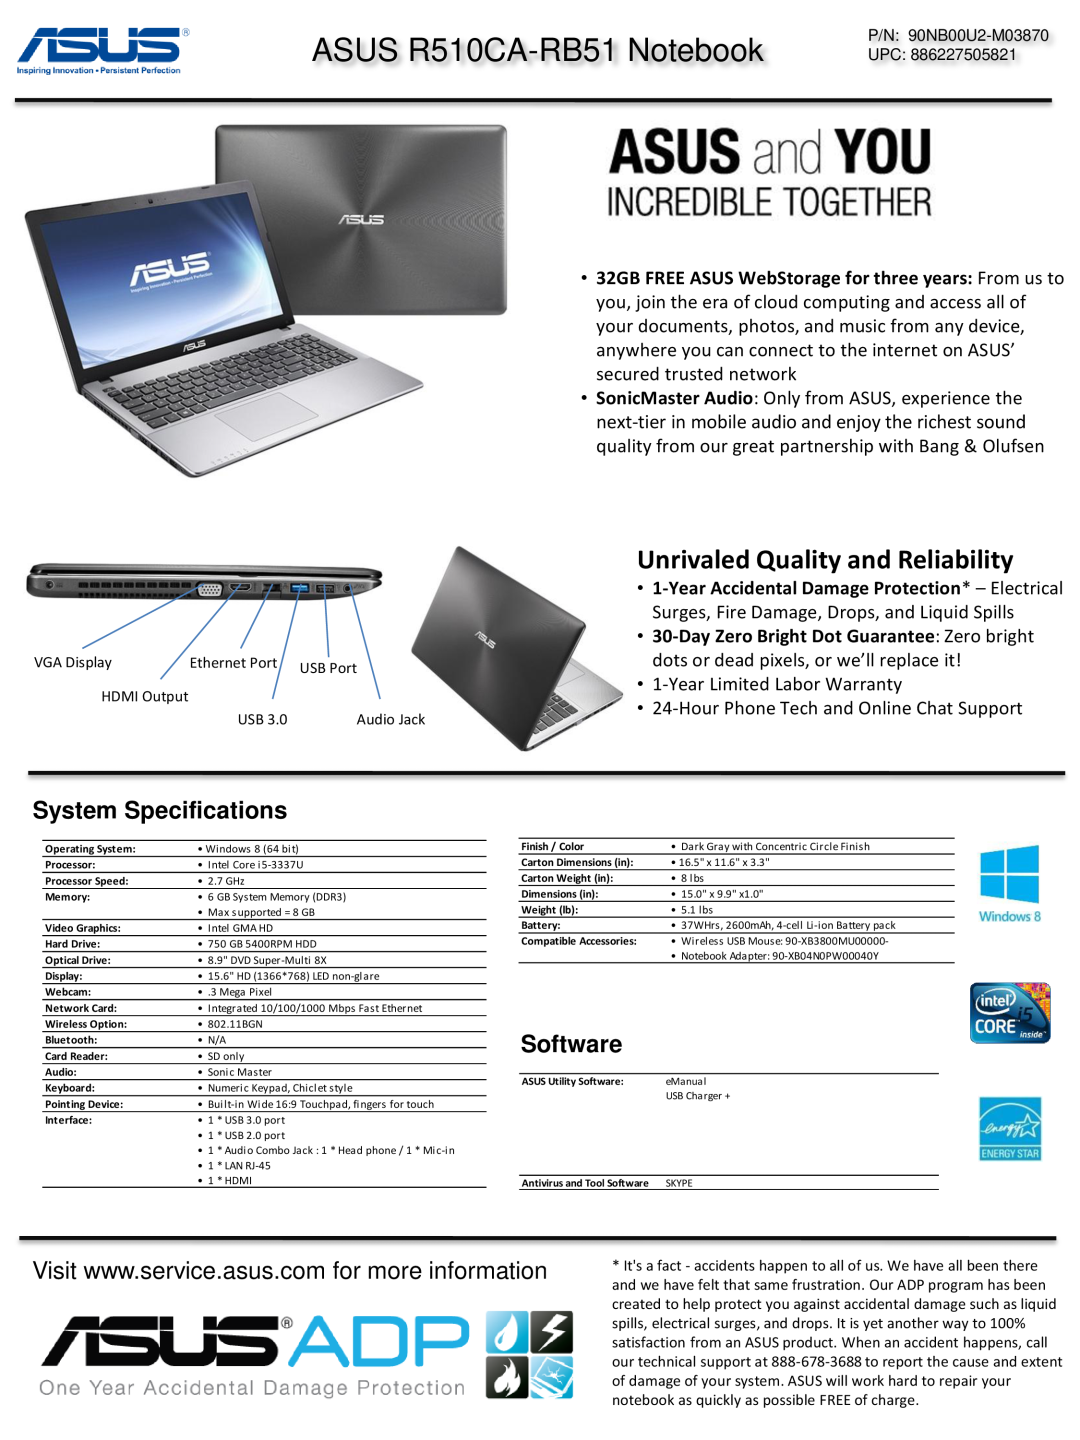 Asus R510CA-RB31 specifications ASUS R510CA-RB51 Notebook, Unrivaled Quality and Reliability, System Specifications 